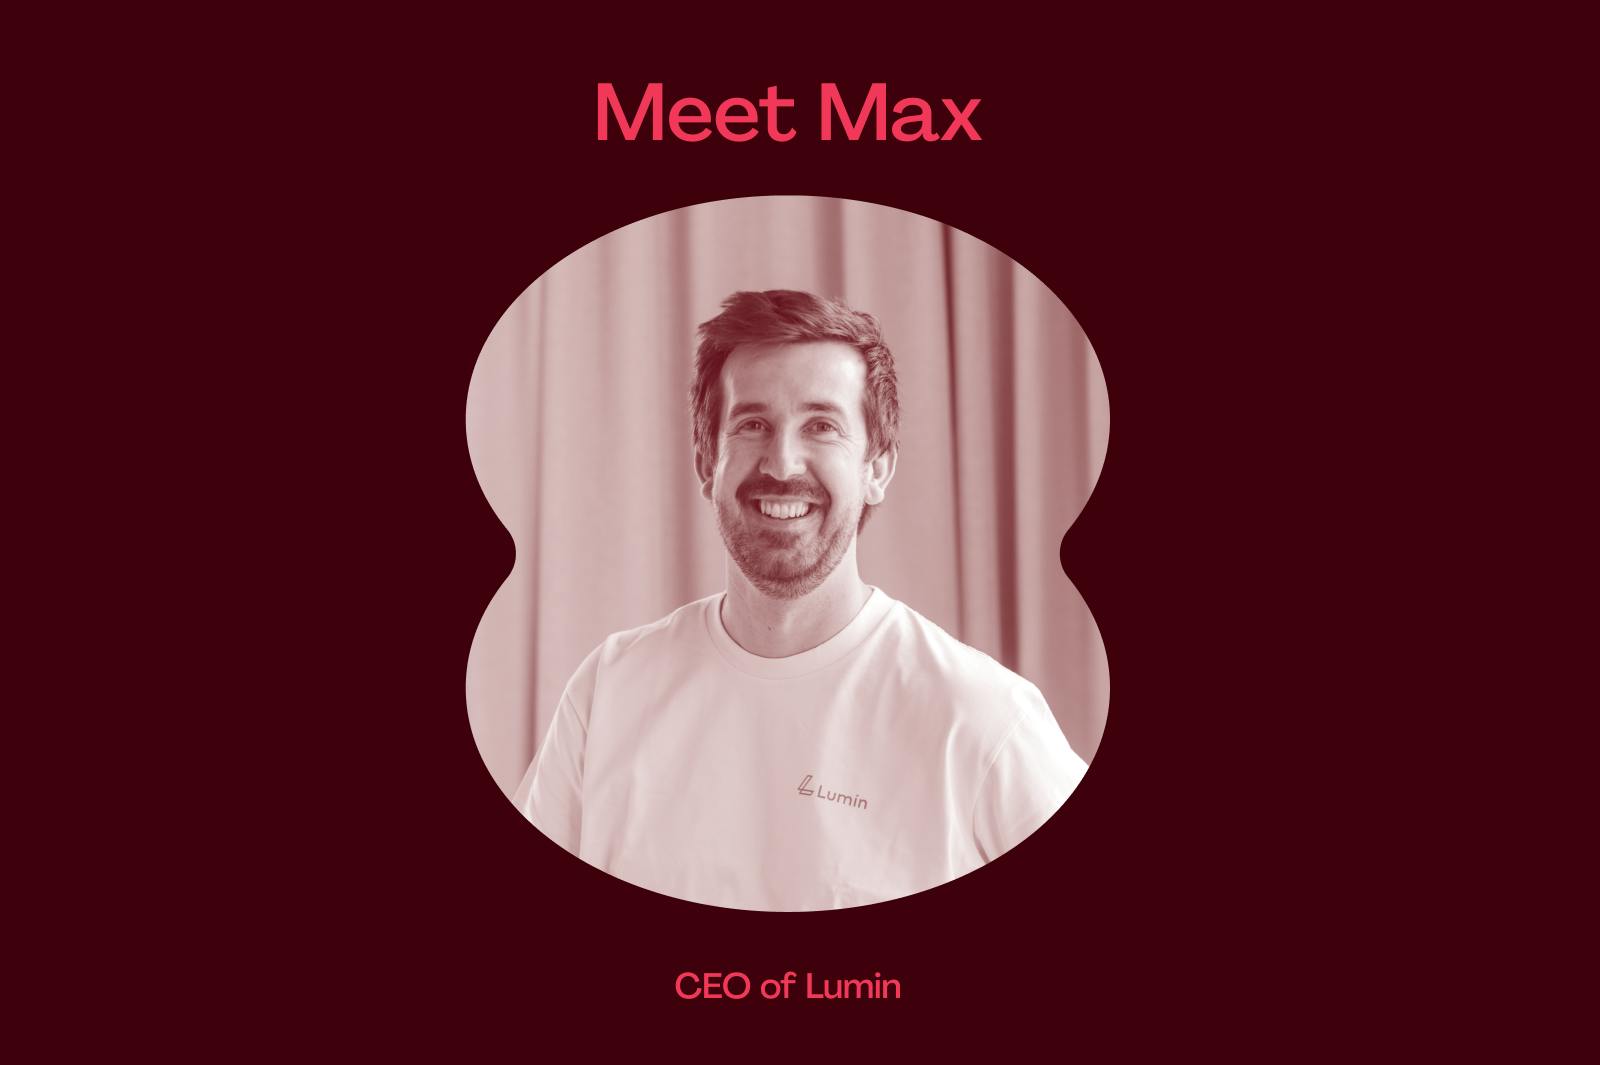 Max - a white man with short brown hair, facial scruff and a big smile - faces the camera. he is wearing a white t-shirt with the Lumin logo on it on the right breast.